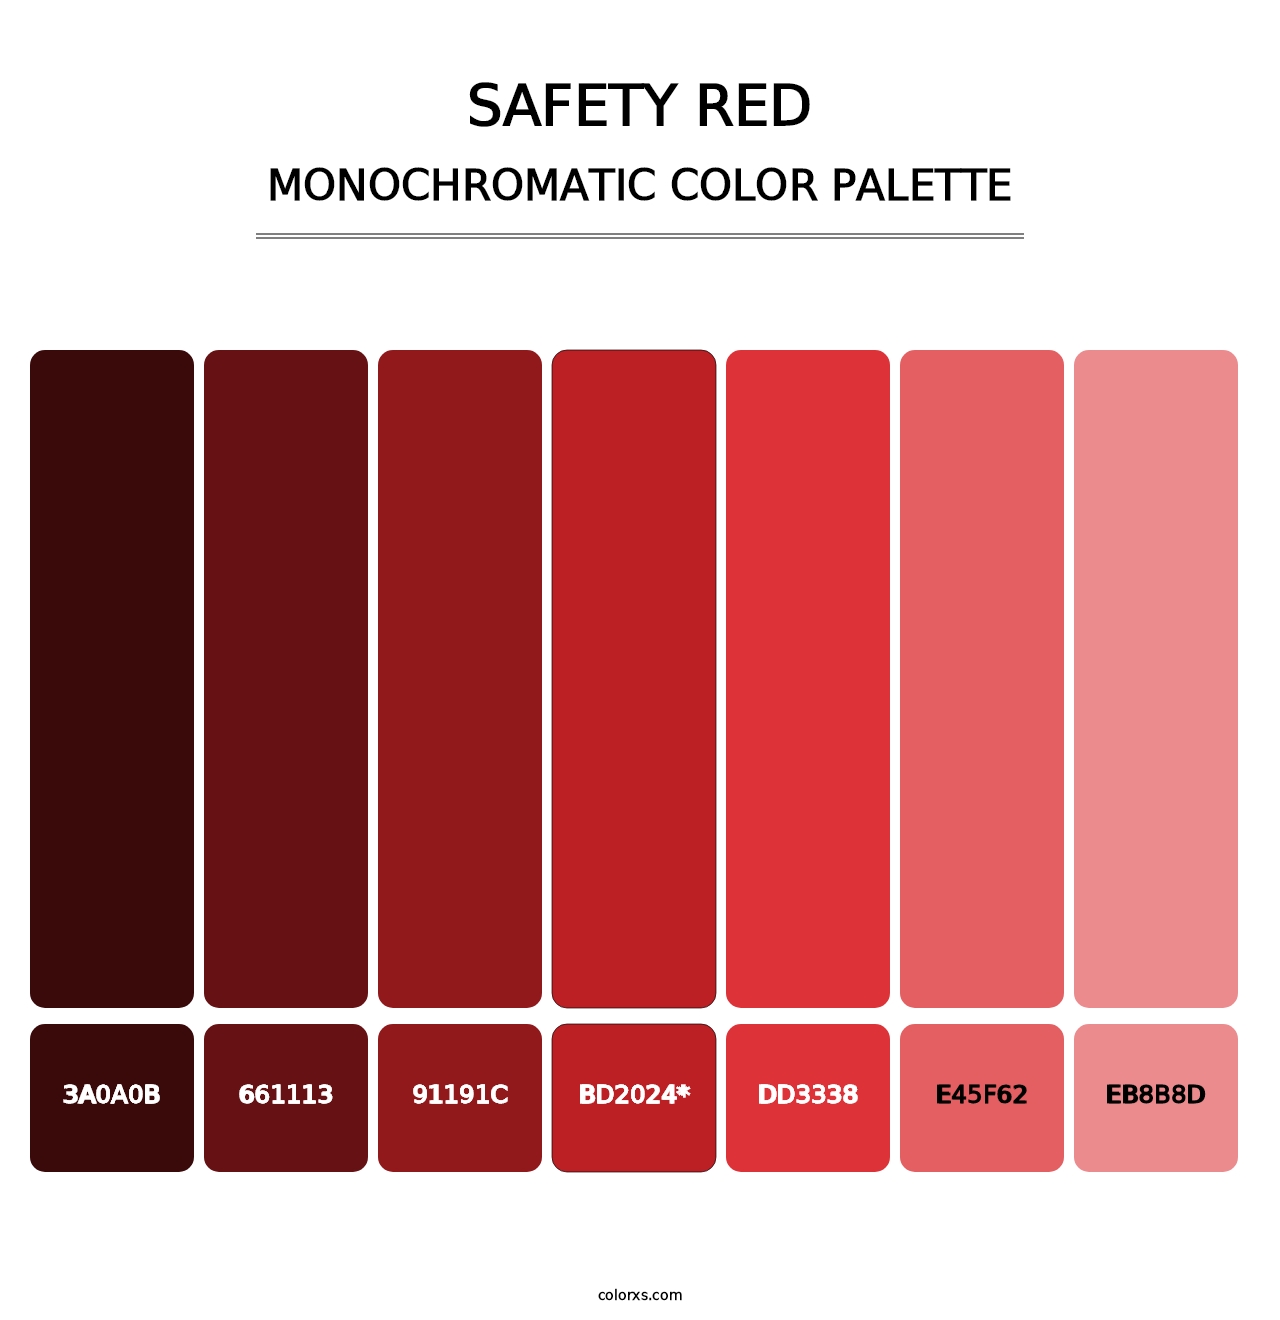 Safety Red - Monochromatic Color Palette